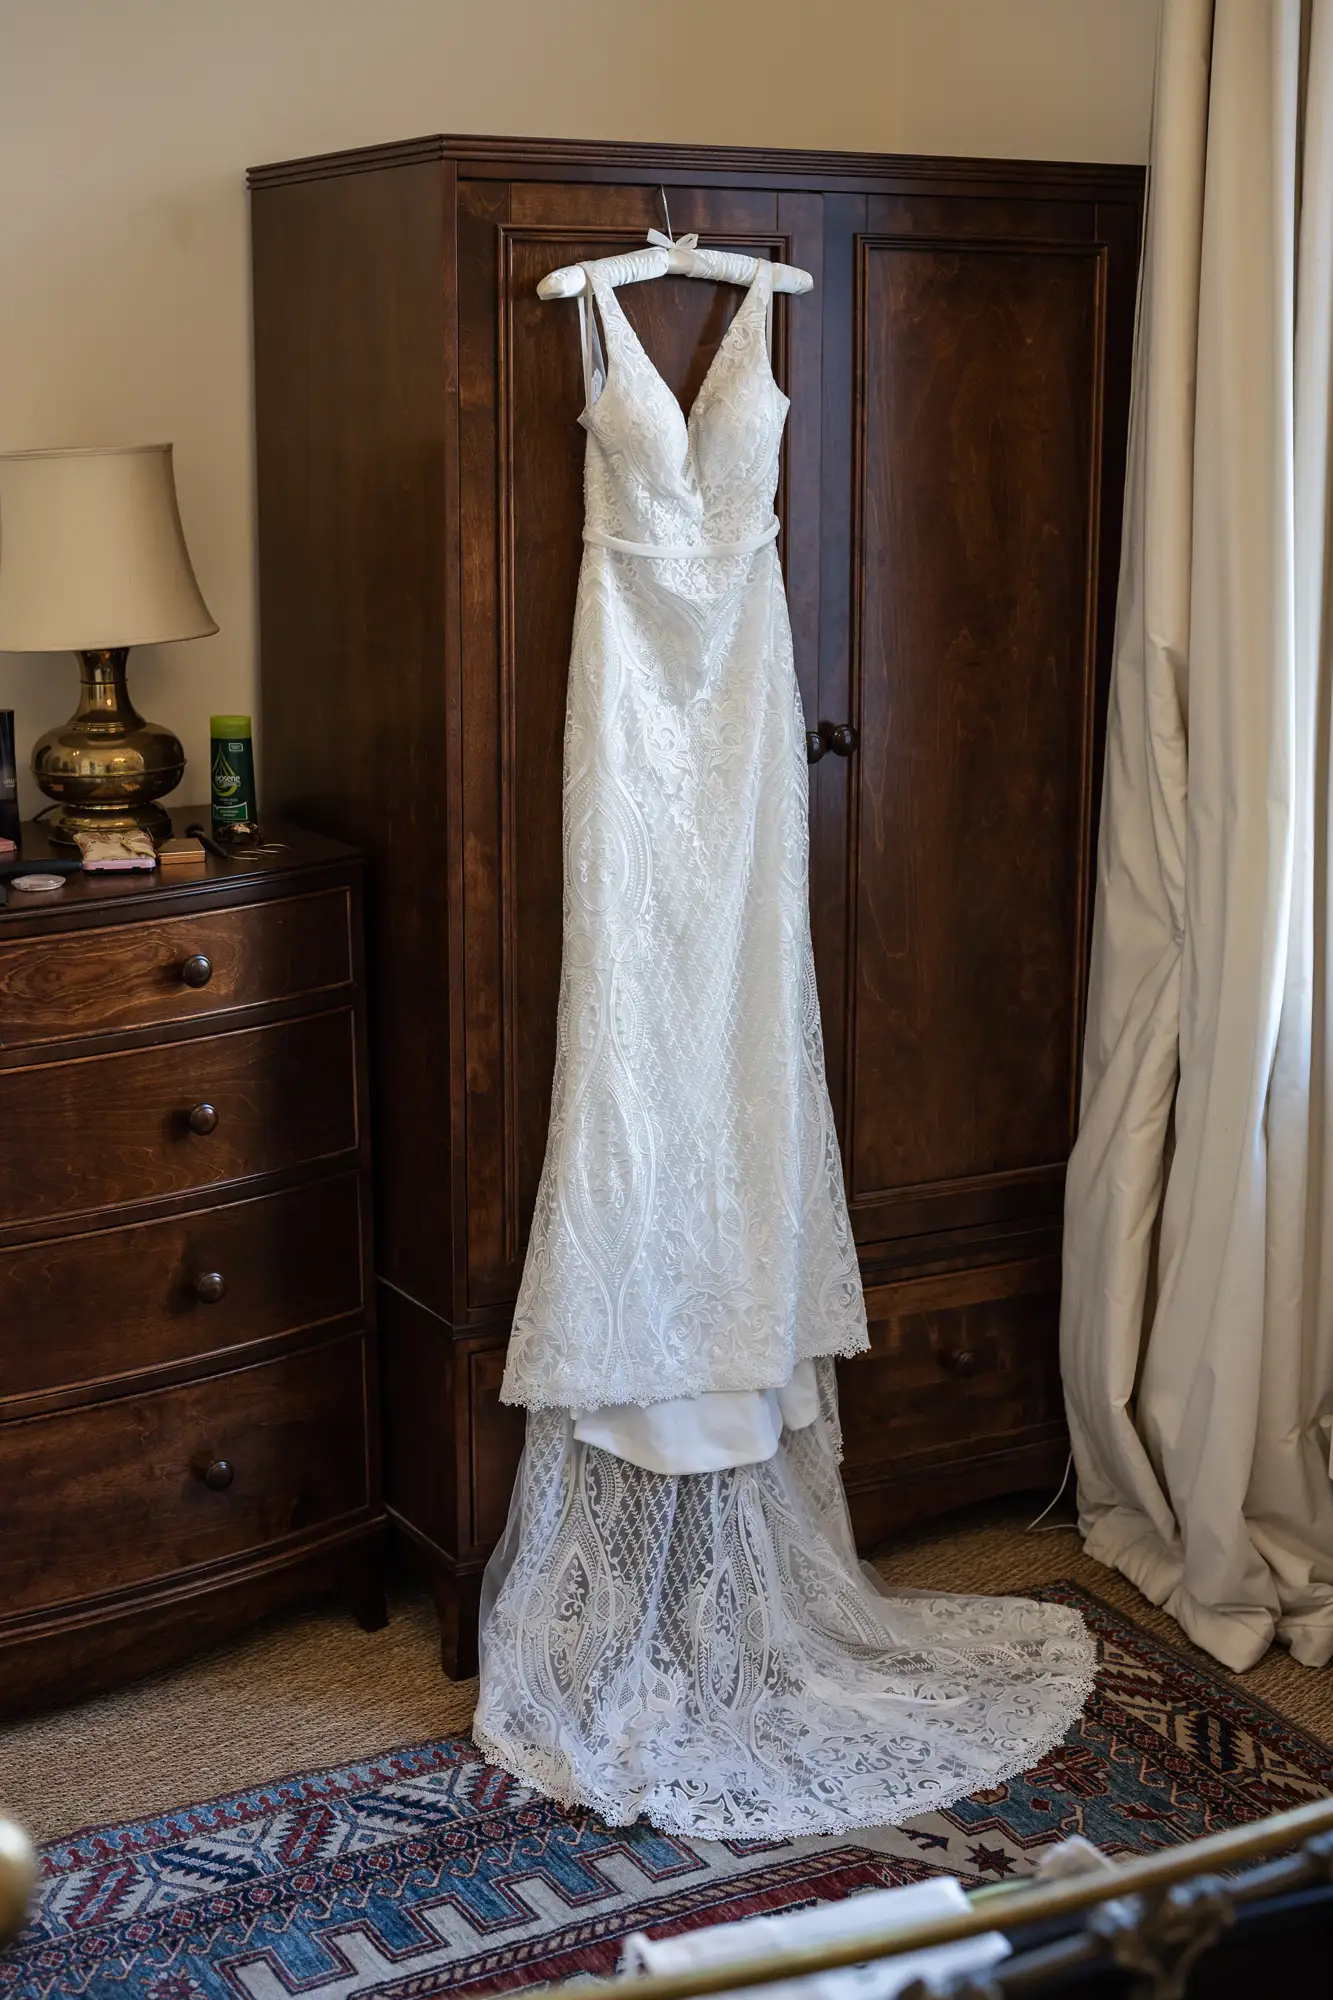 A white wedding dress with lace detailing hangs in front of a dark wood wardrobe in a bedroom setting.